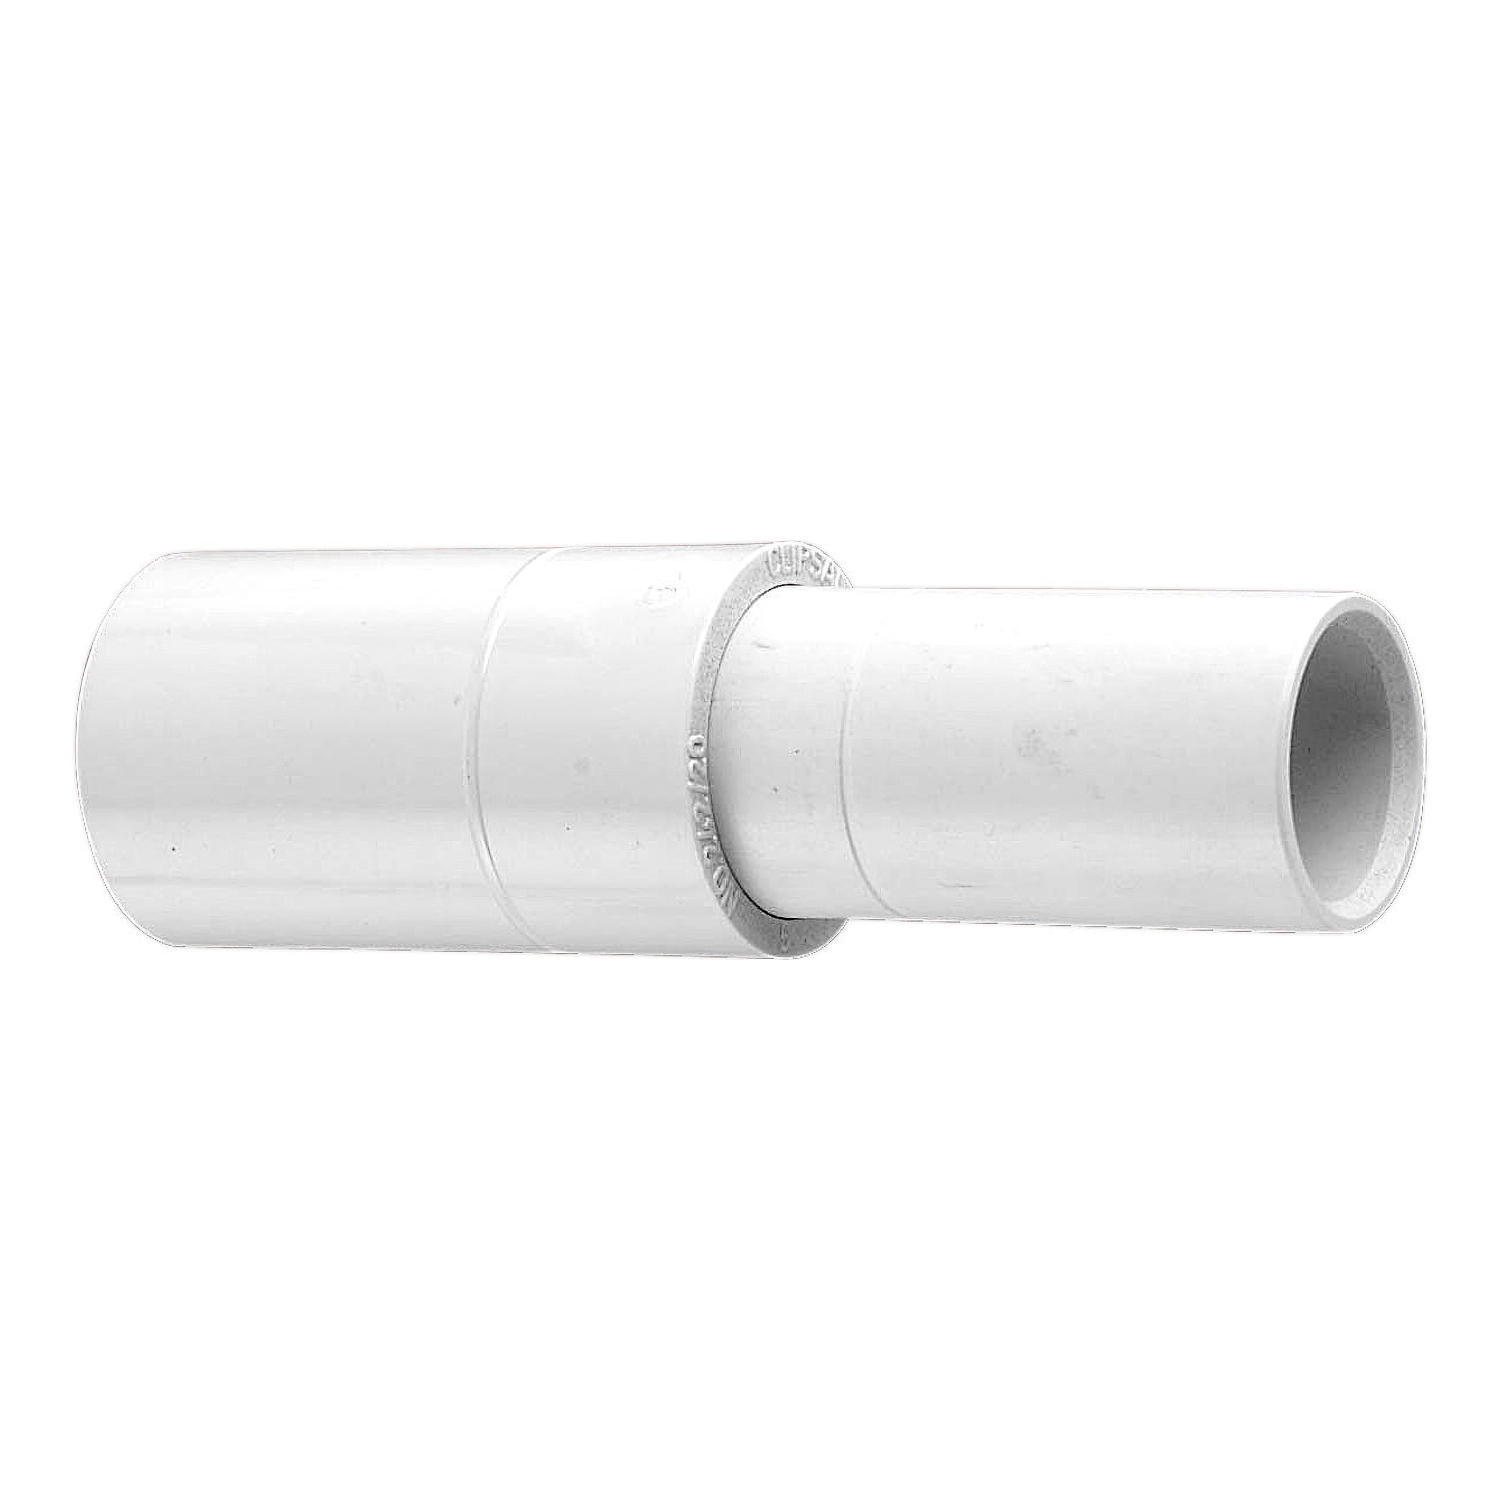 COUPLING COND PVC EXPANSION, Grey